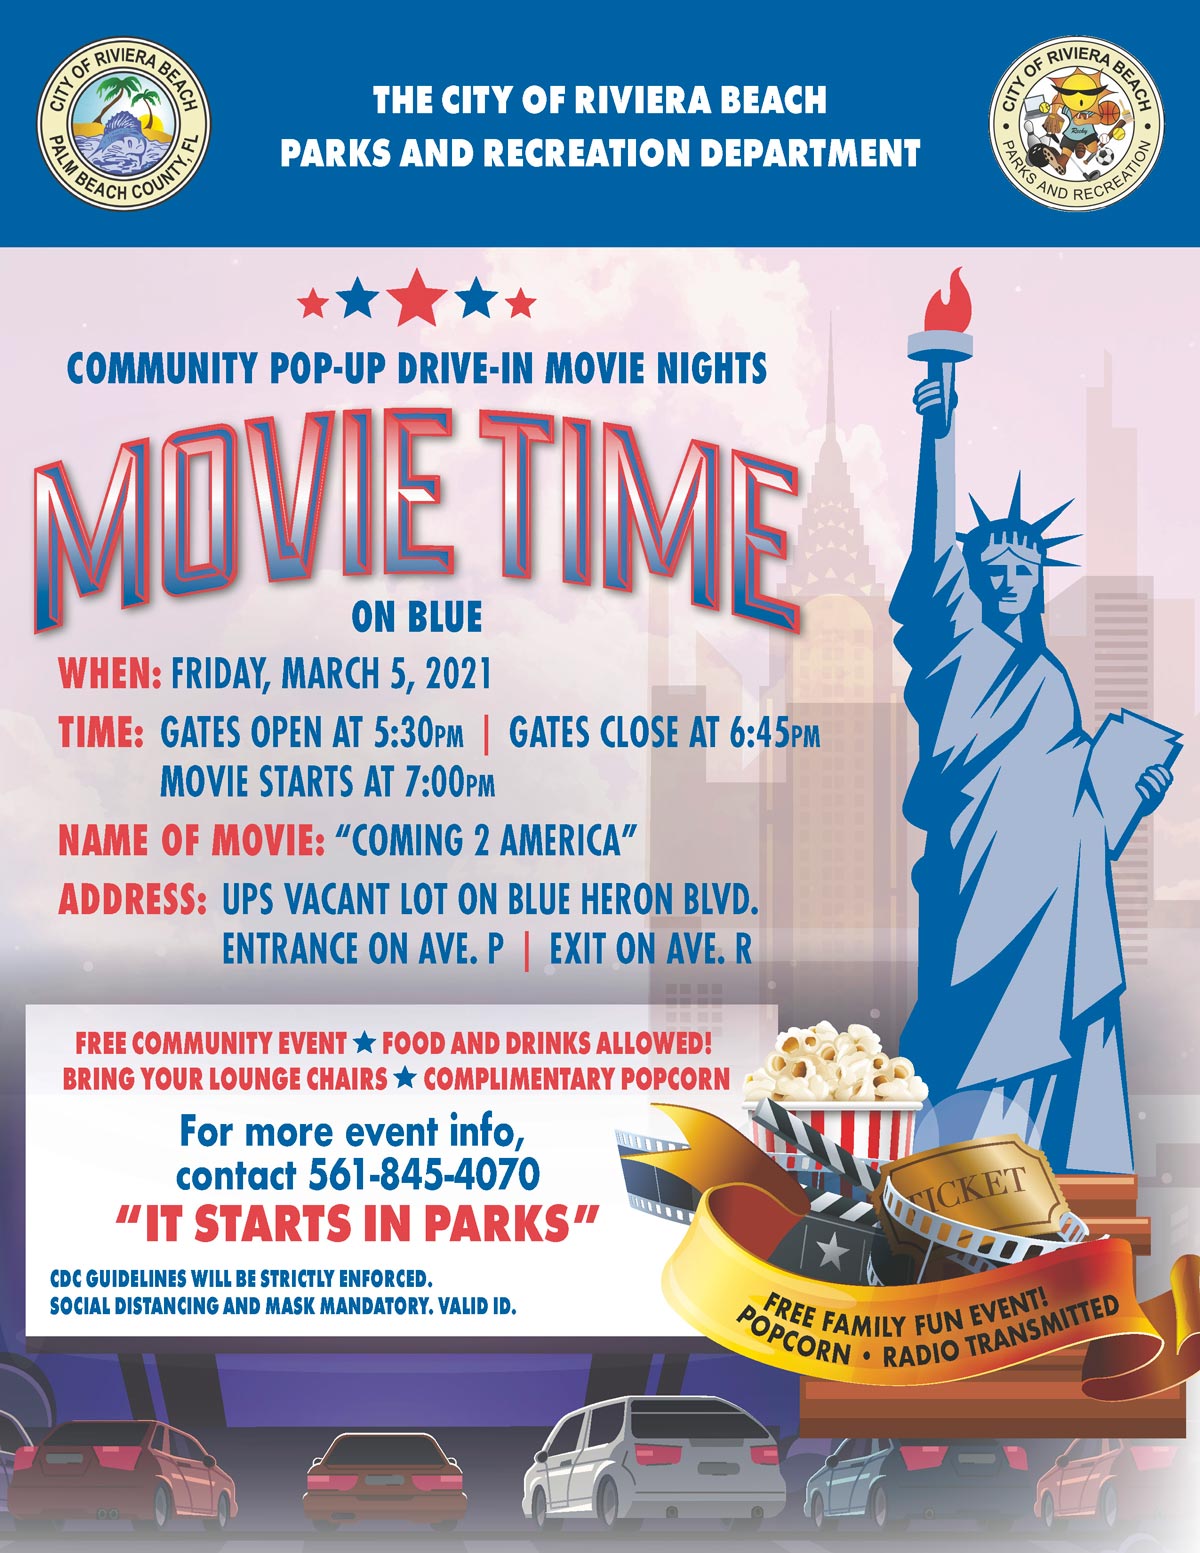 COMMUNITY POP-UP DRIVE-IN MOVIE NIGHTS FRIDAY, MARCH 5, 2021 GATES OPEN AT 5:30PM GATESUPS VACANT LOT ON BLUE HERON BLVD. CLOSE AT 6:45PM